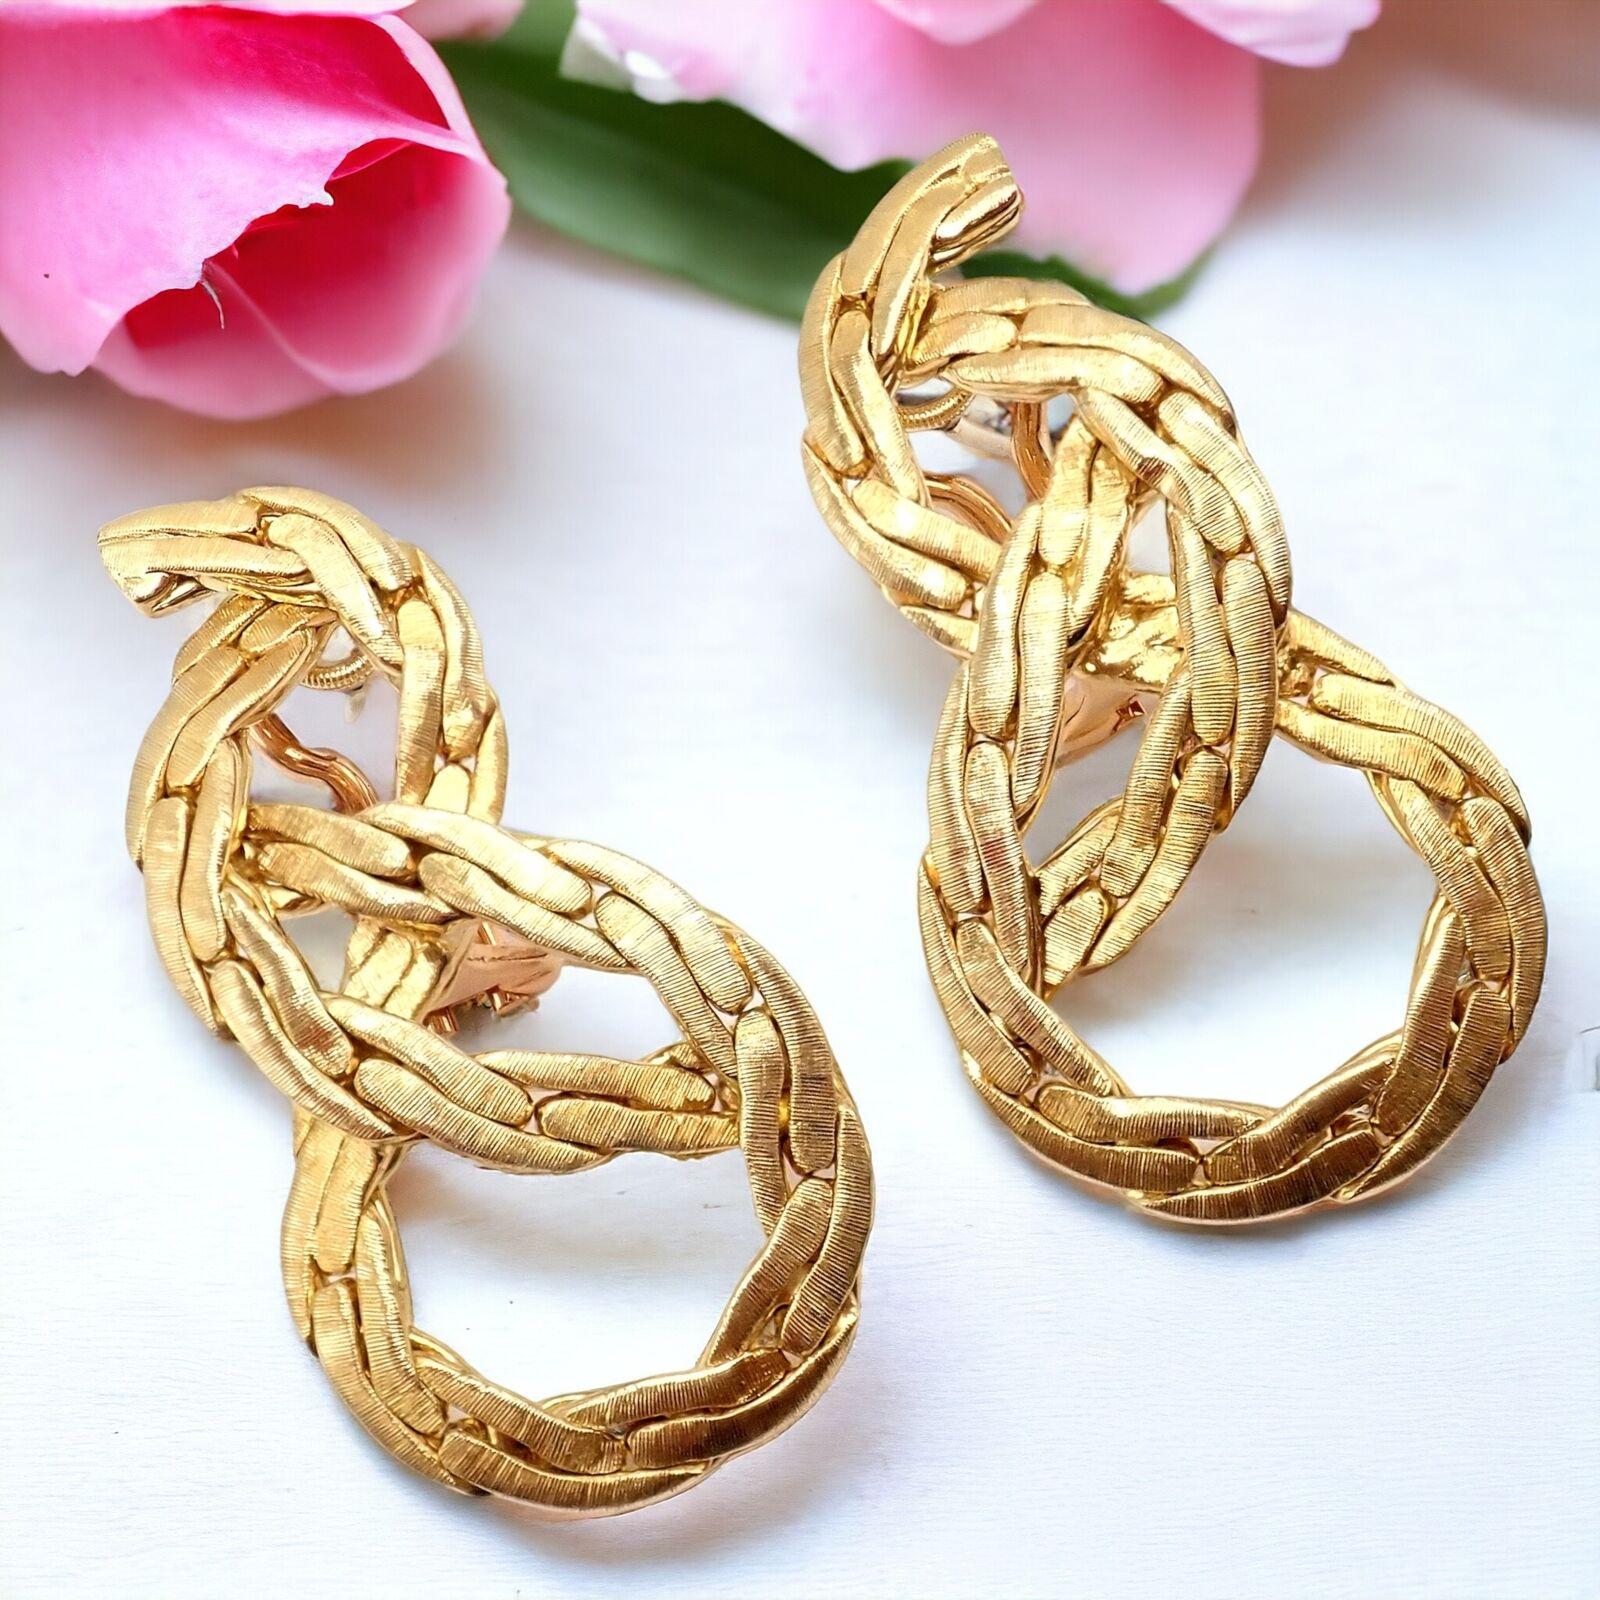 18k Yellow Gold Vintage Knot Rope Coil Drop Earrings by Buccellati.
These authentic vintage Buccellati earrings are a stunning representation of classic elegance and artisanal excellence. 
Crafted in 18k yellow gold, they feature a distinctive knot